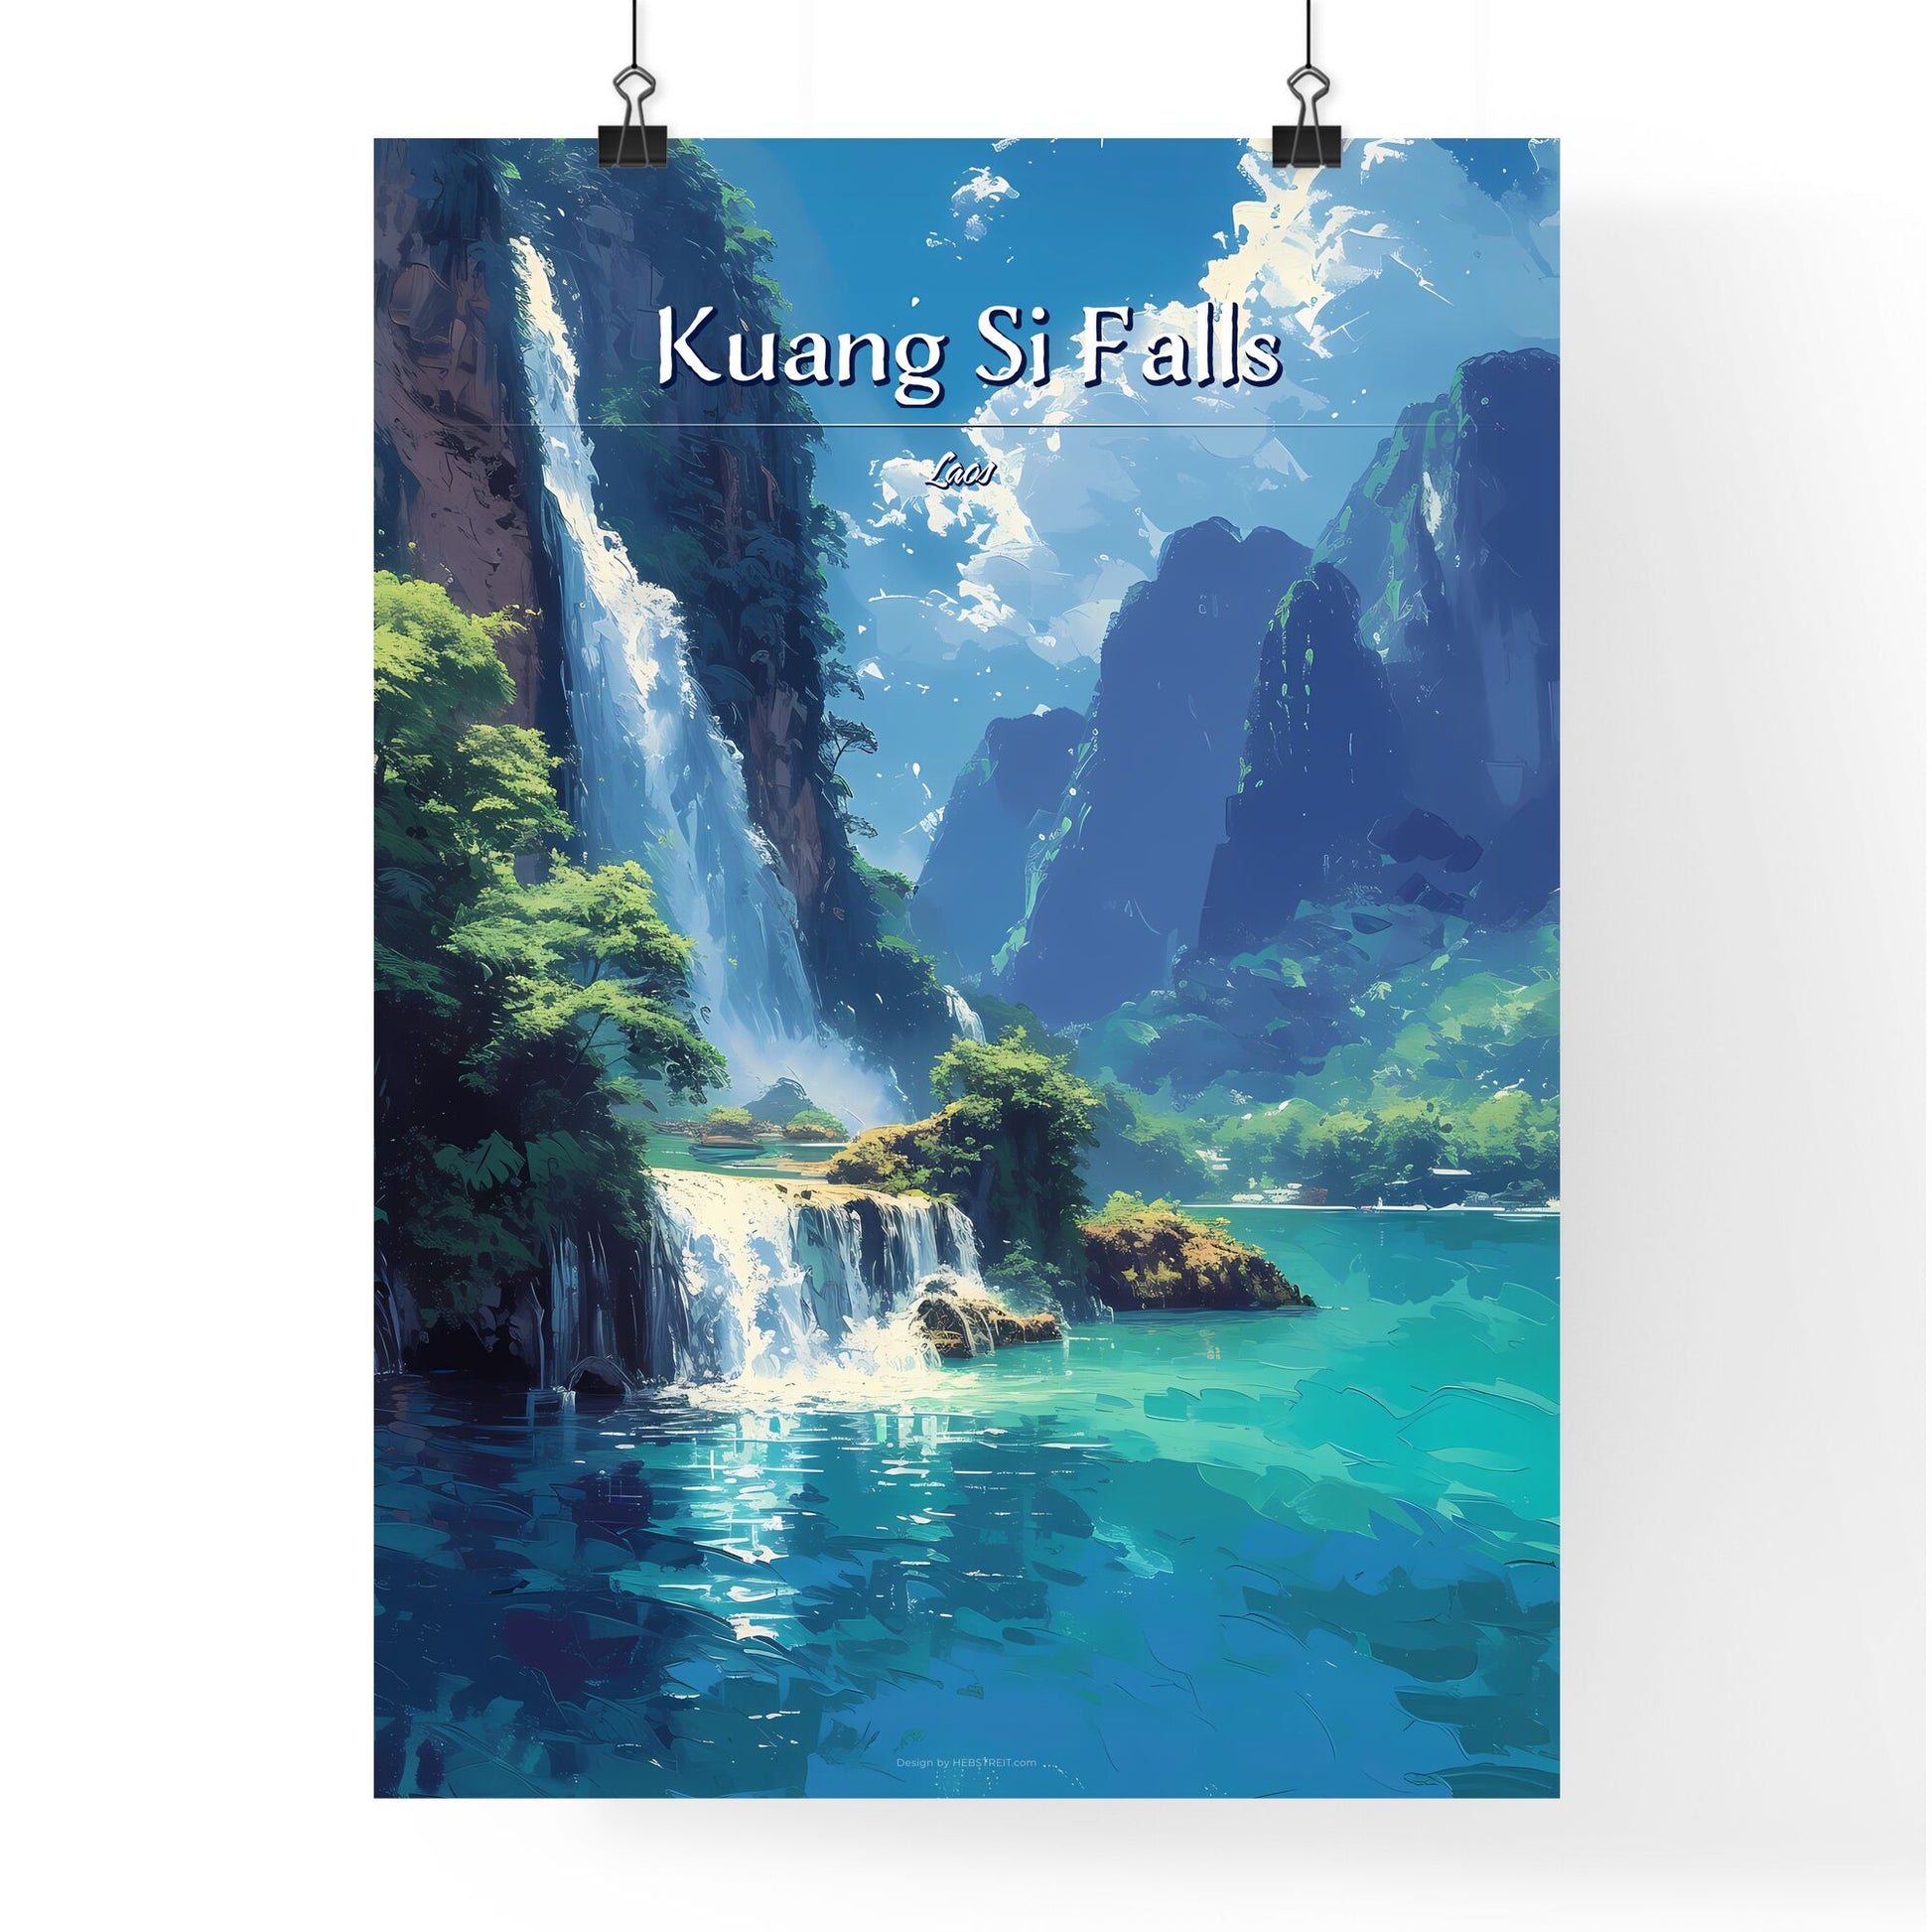 Kuang Si Falls, Laos - Art print of a waterfall and blue water Default Title